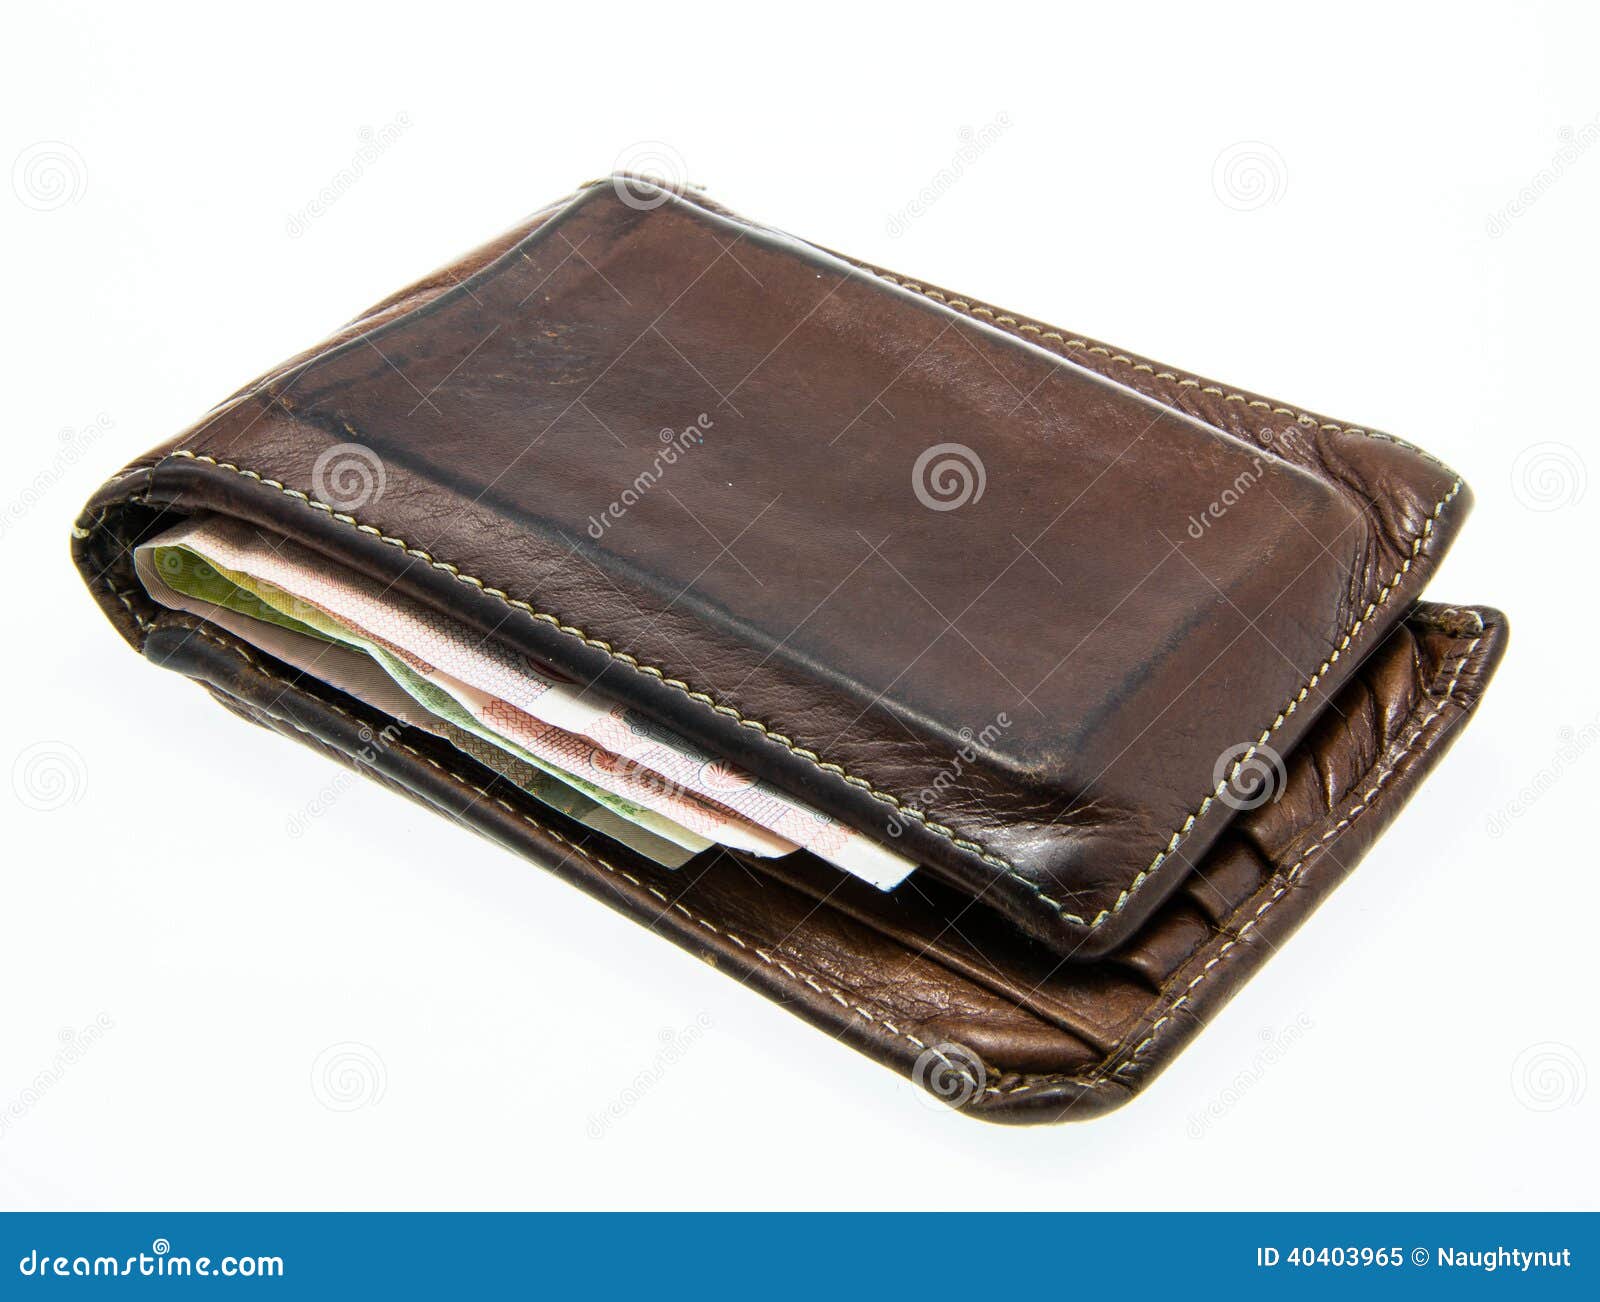 Old Vintage Used Leather Wallet Stock Photo - Image: 40403965